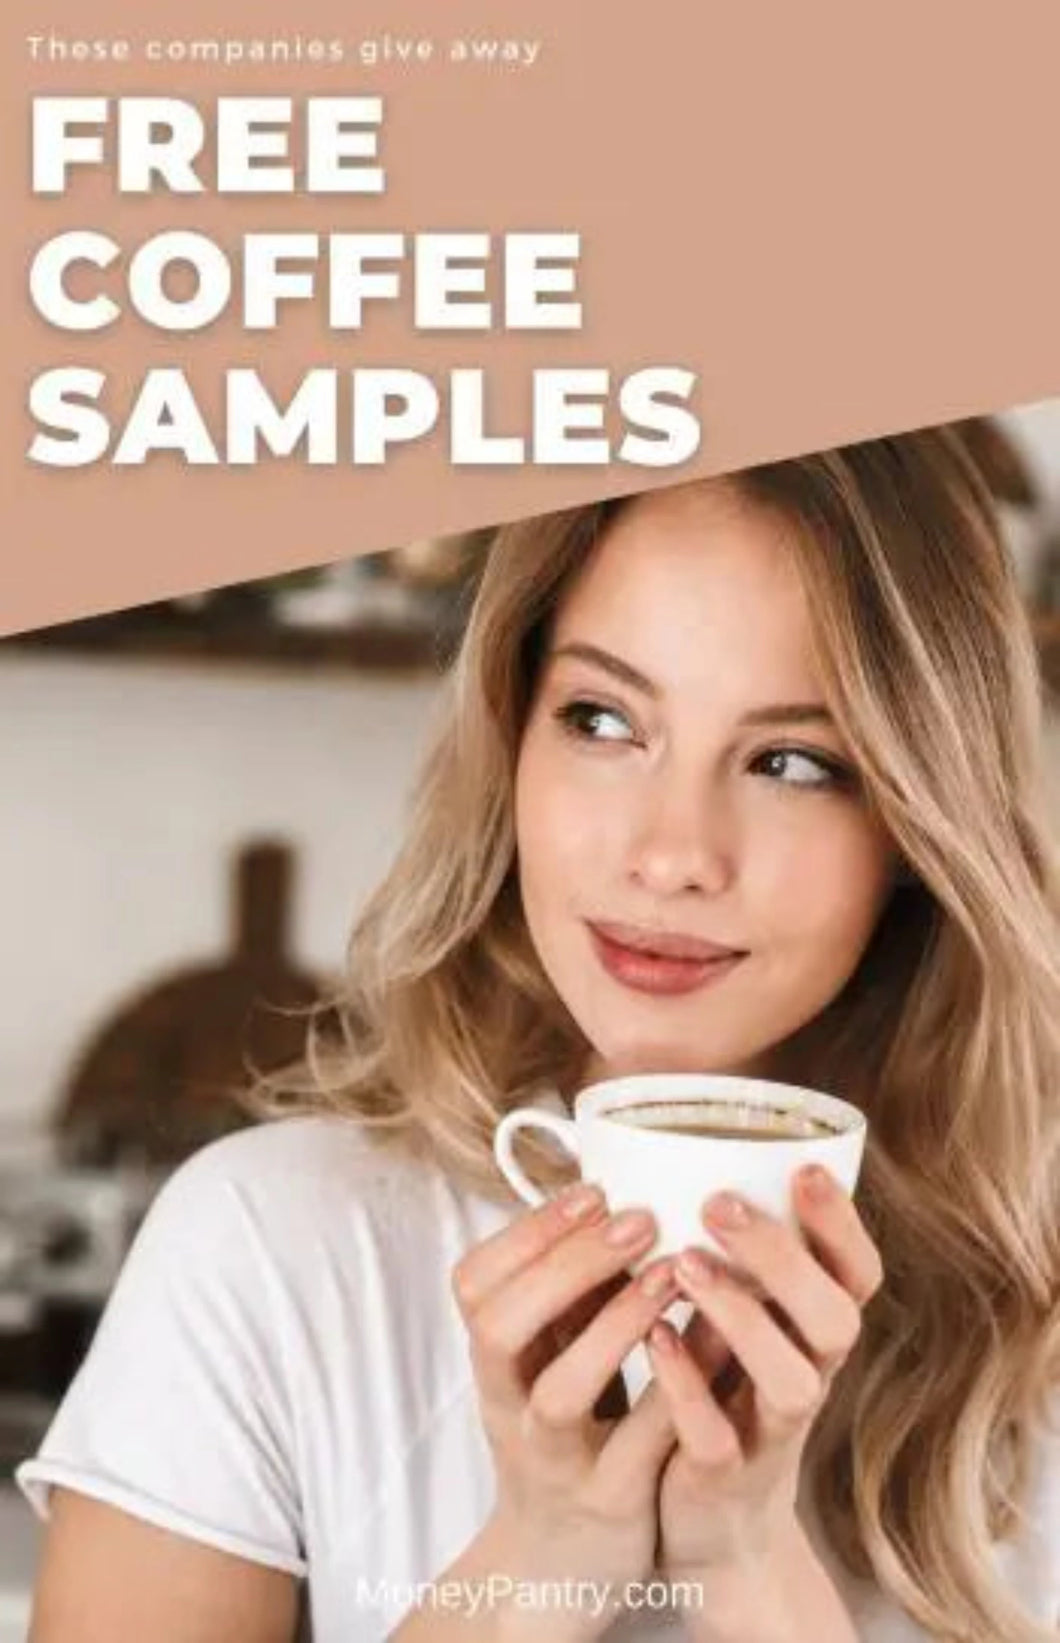 22 Ways to Get Free Coffee Samples by Mail